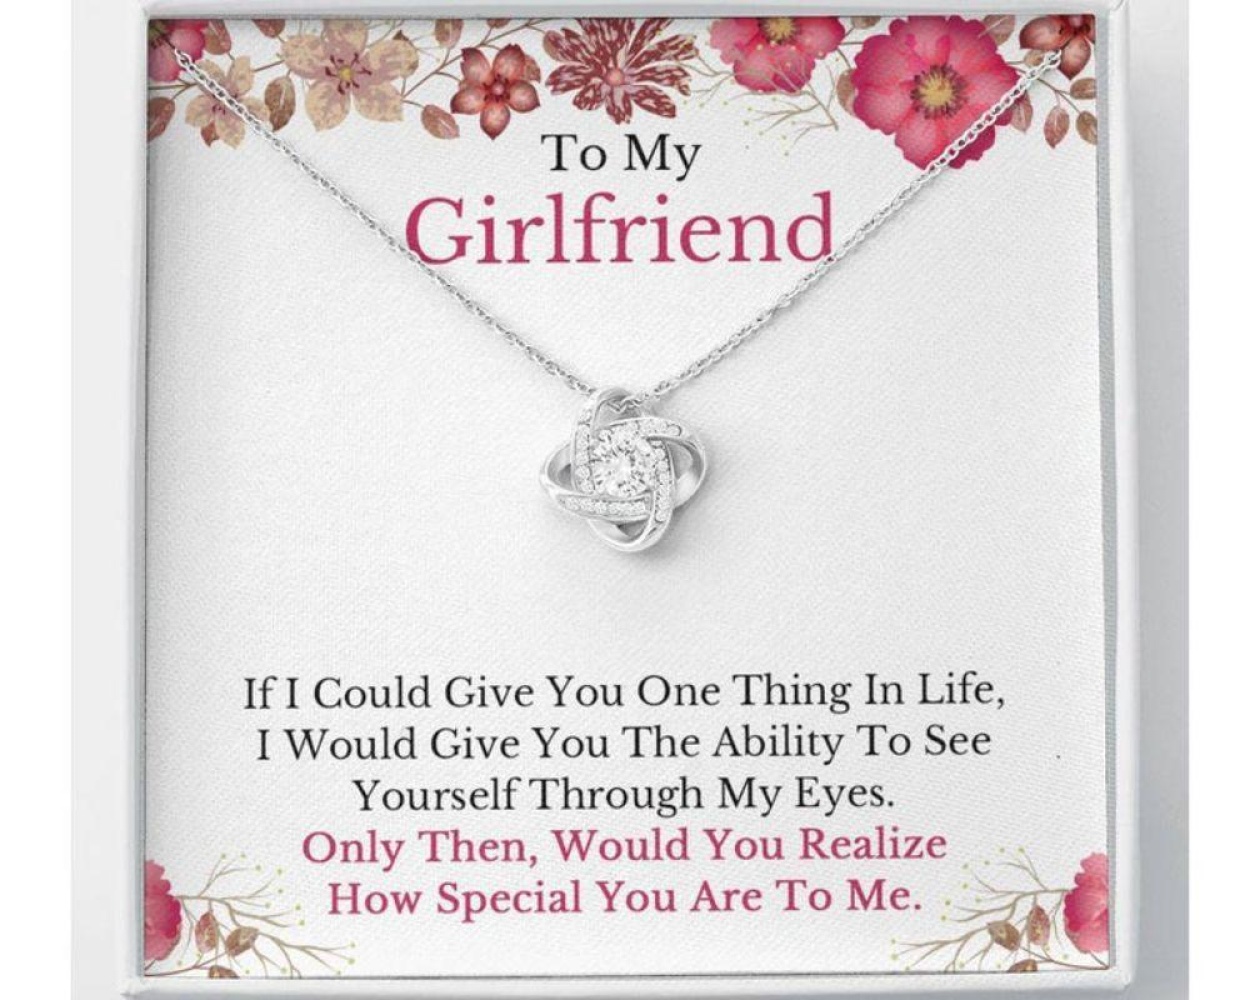 Girlfriend Necklace, To My Girlfriend Necklace, Anniversary Birthday Christmas Gift For Girlfriend